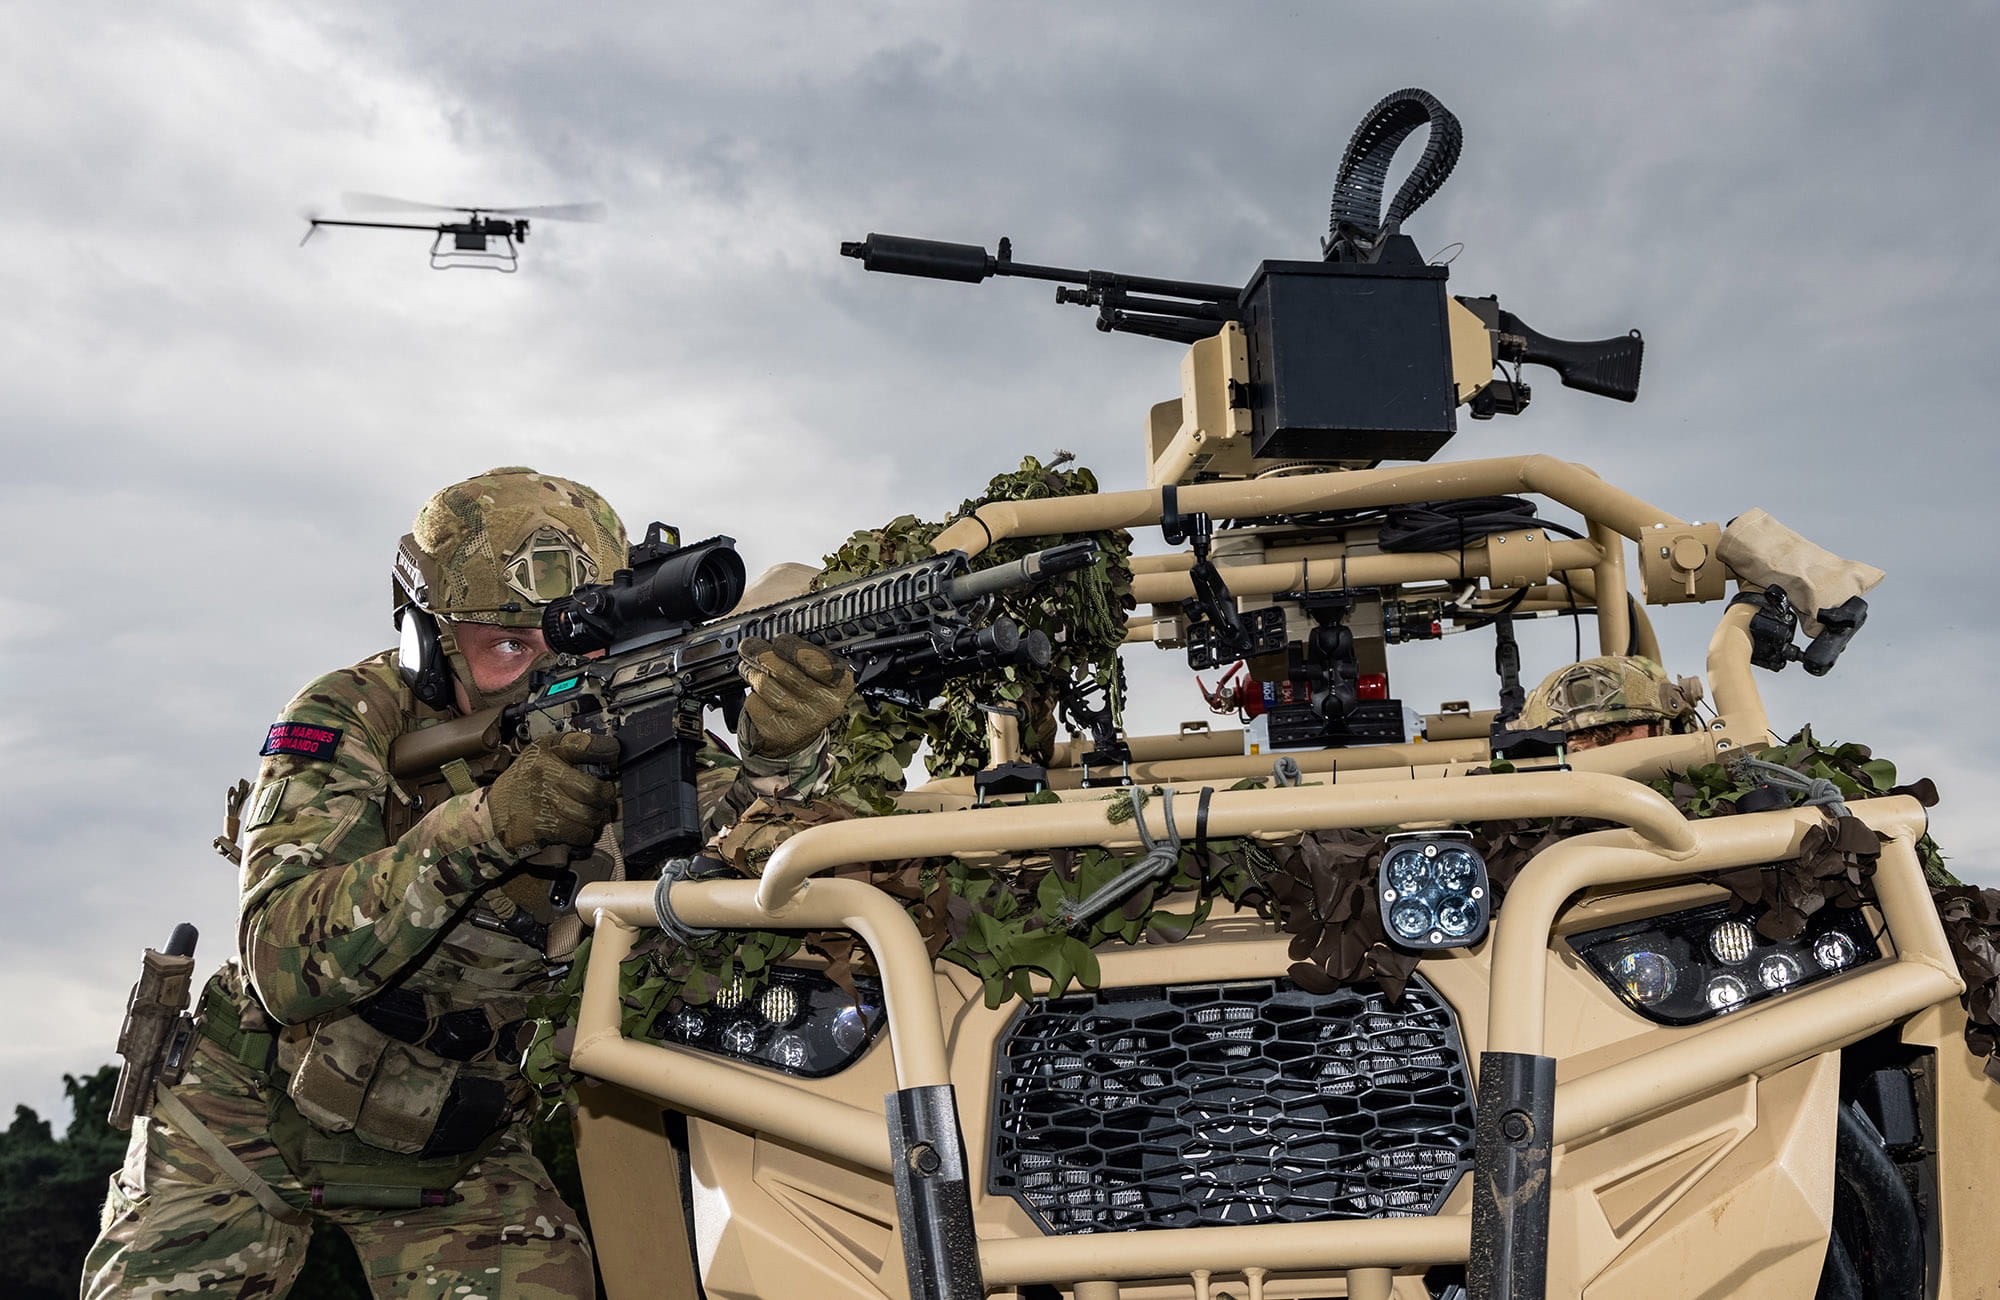 Royal Marine of 40 Commando taking aim behind a Polaris with drone in the background